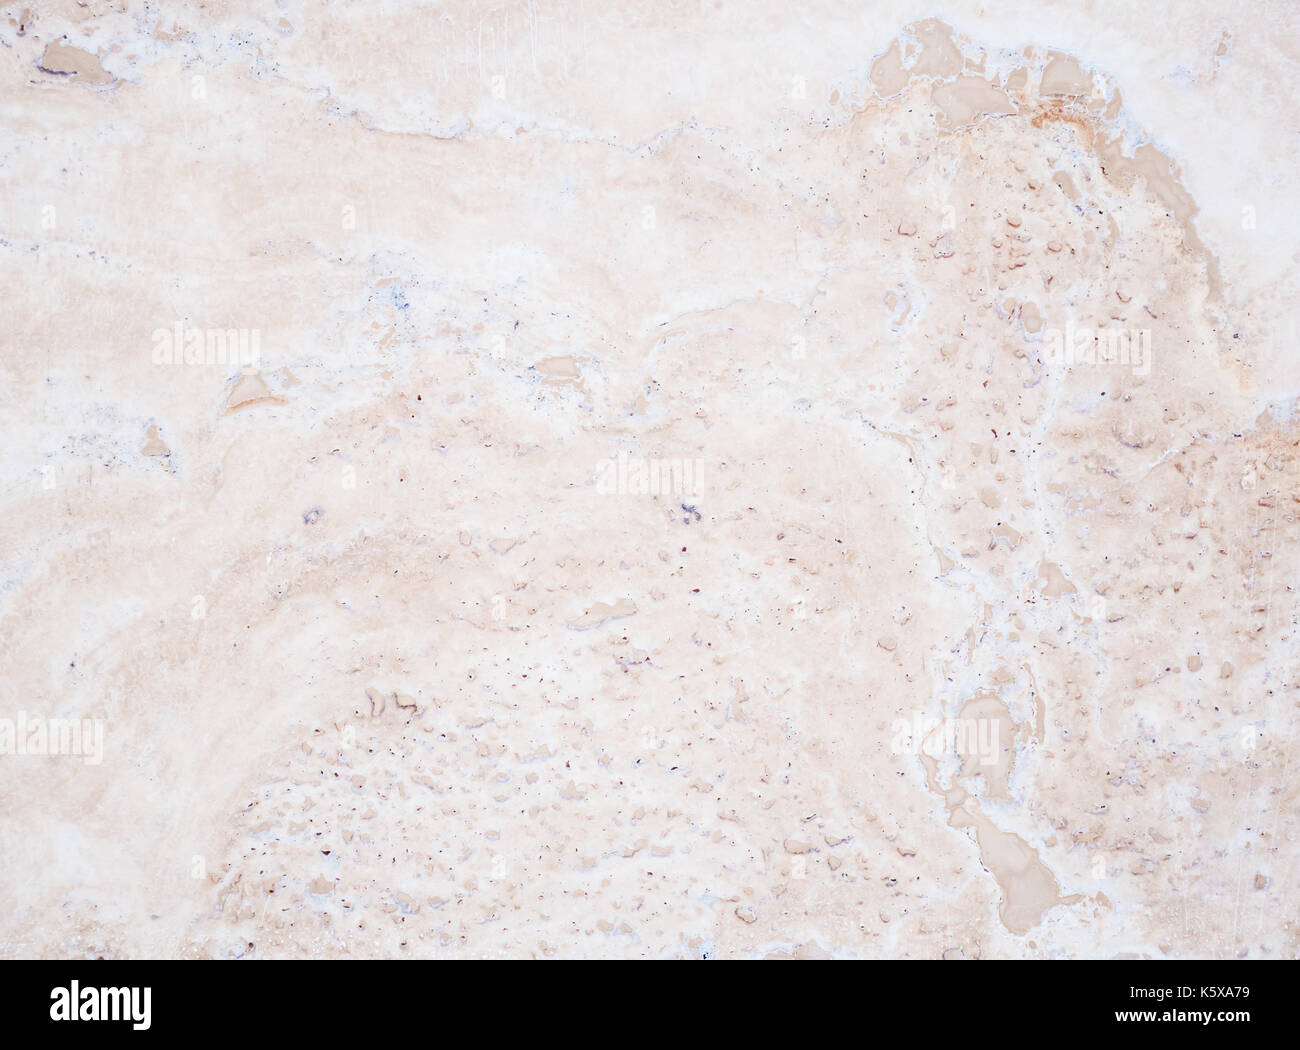 Marble texture surface Stock Photo